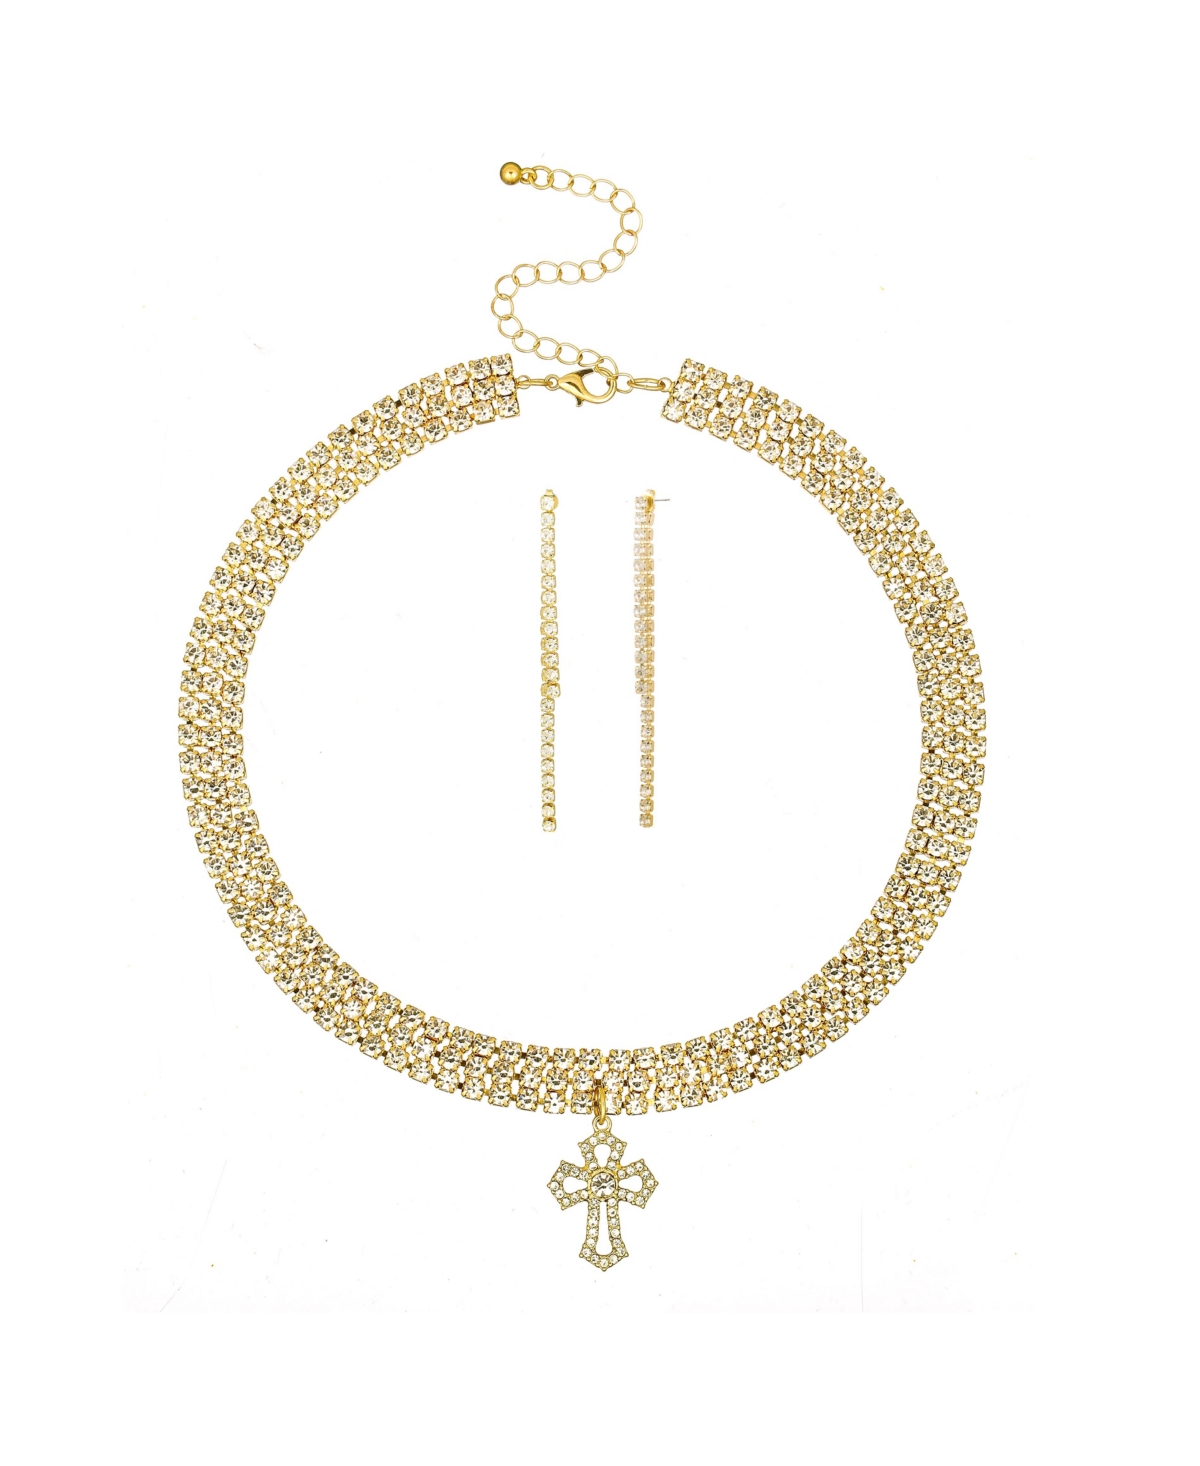 Cross Necklace And Earring Set - Gold